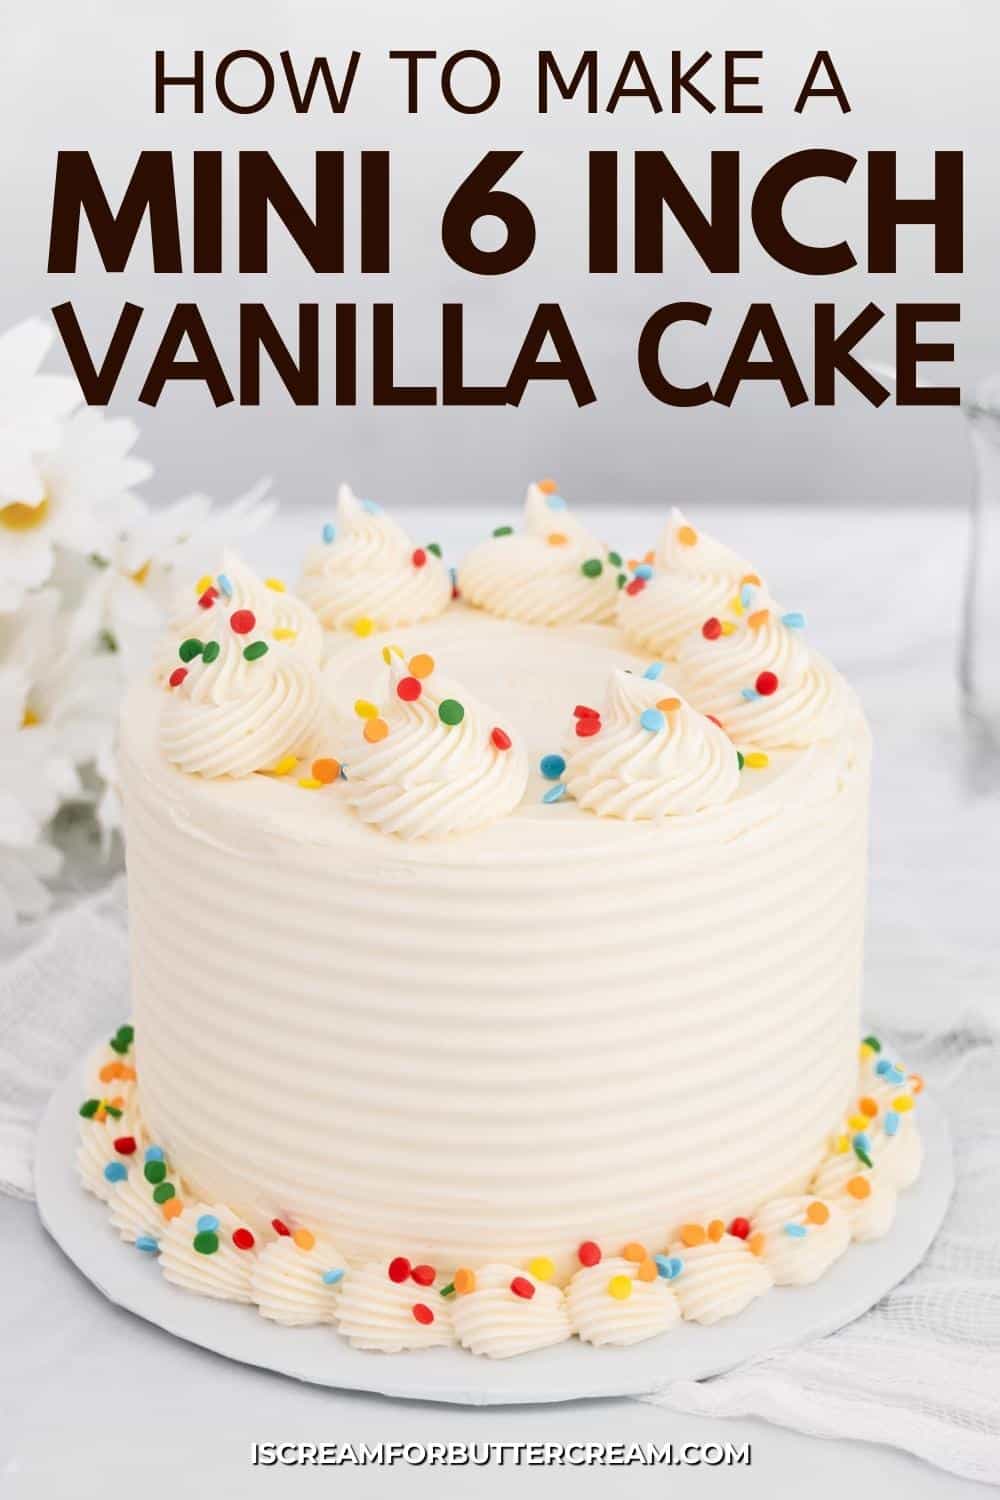 Mini vanilla cake with sprinkles and text overlay.